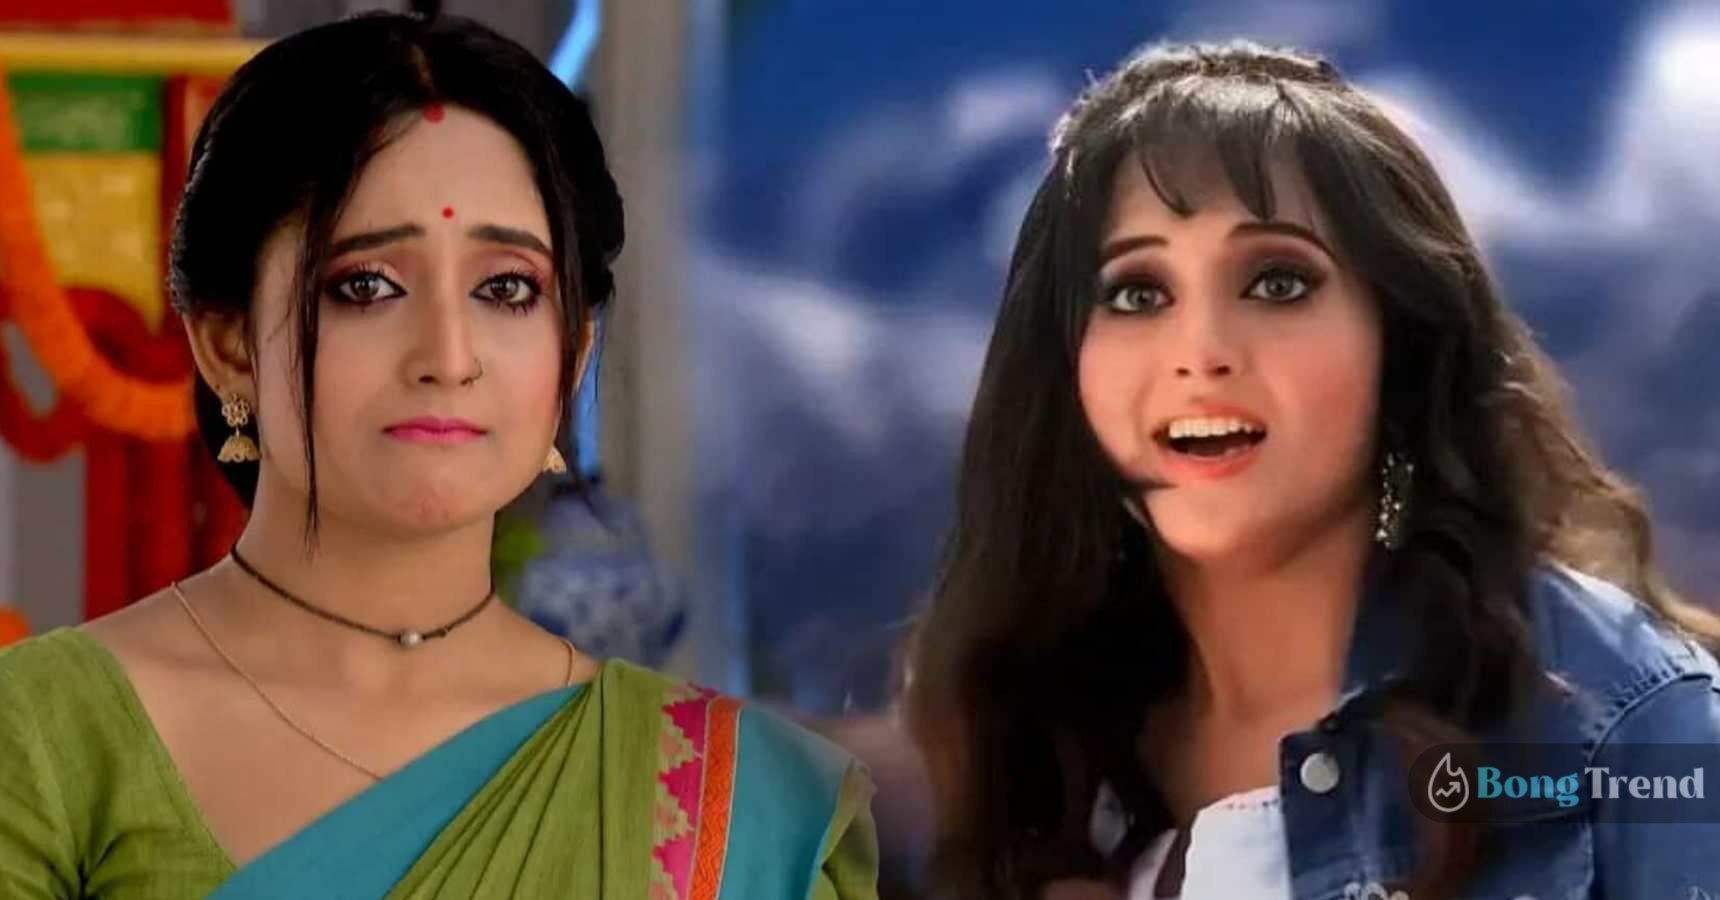 Mithai serial low budget graphics got trolled on social media